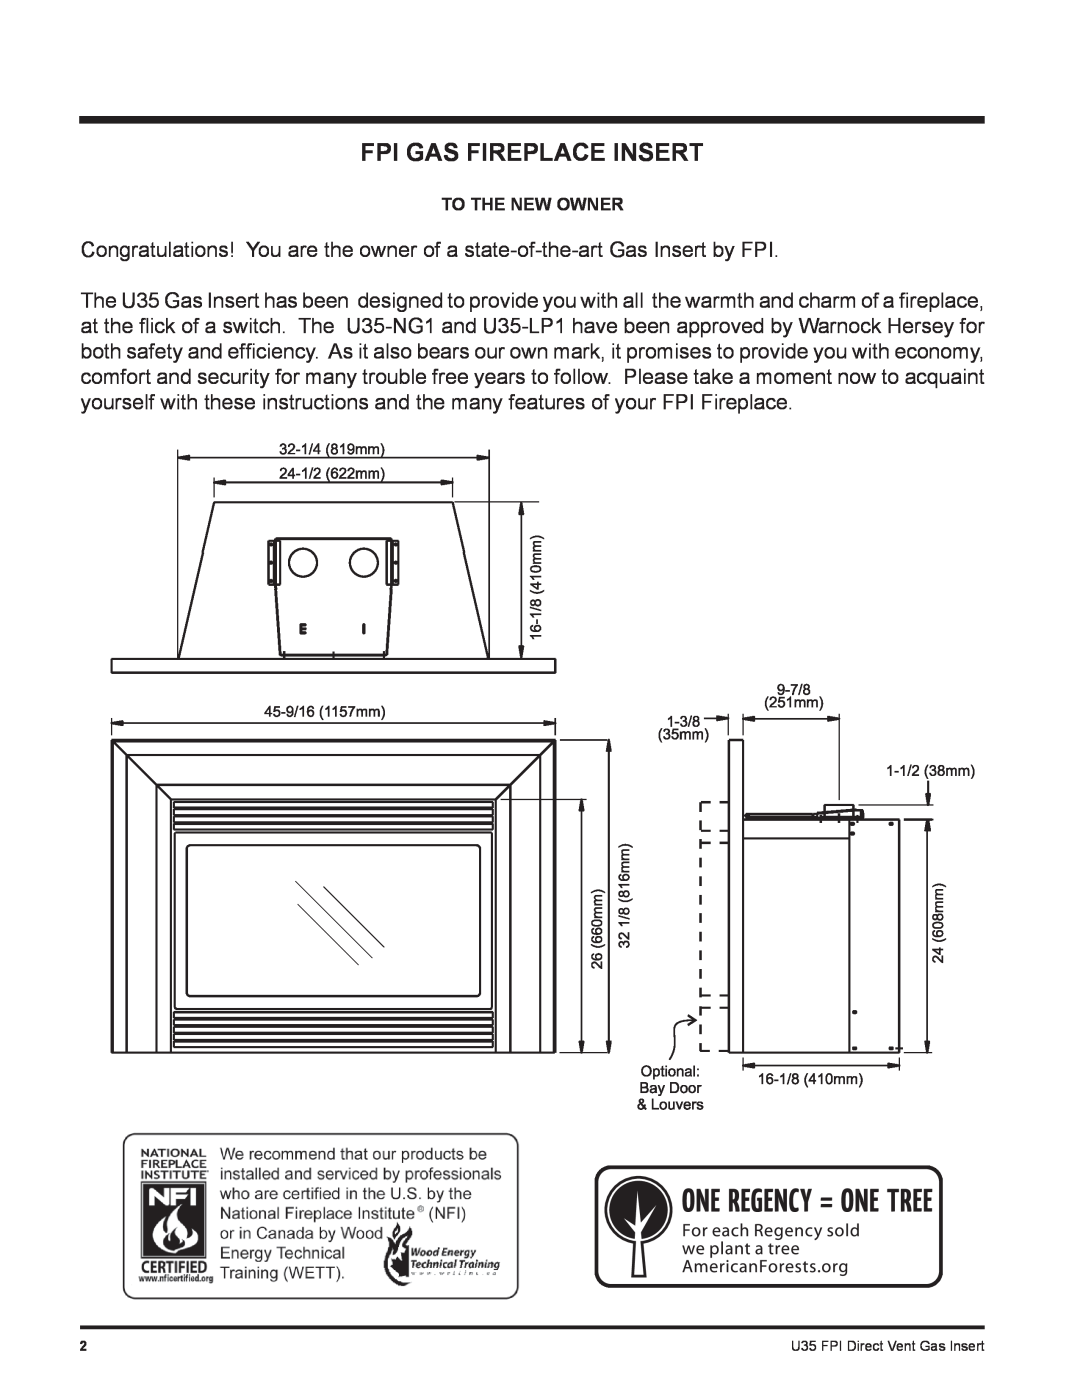 Regency U35-NG1, U35-LP1 installation manual Fpi Gas Fireplace Insert, To The New Owner 